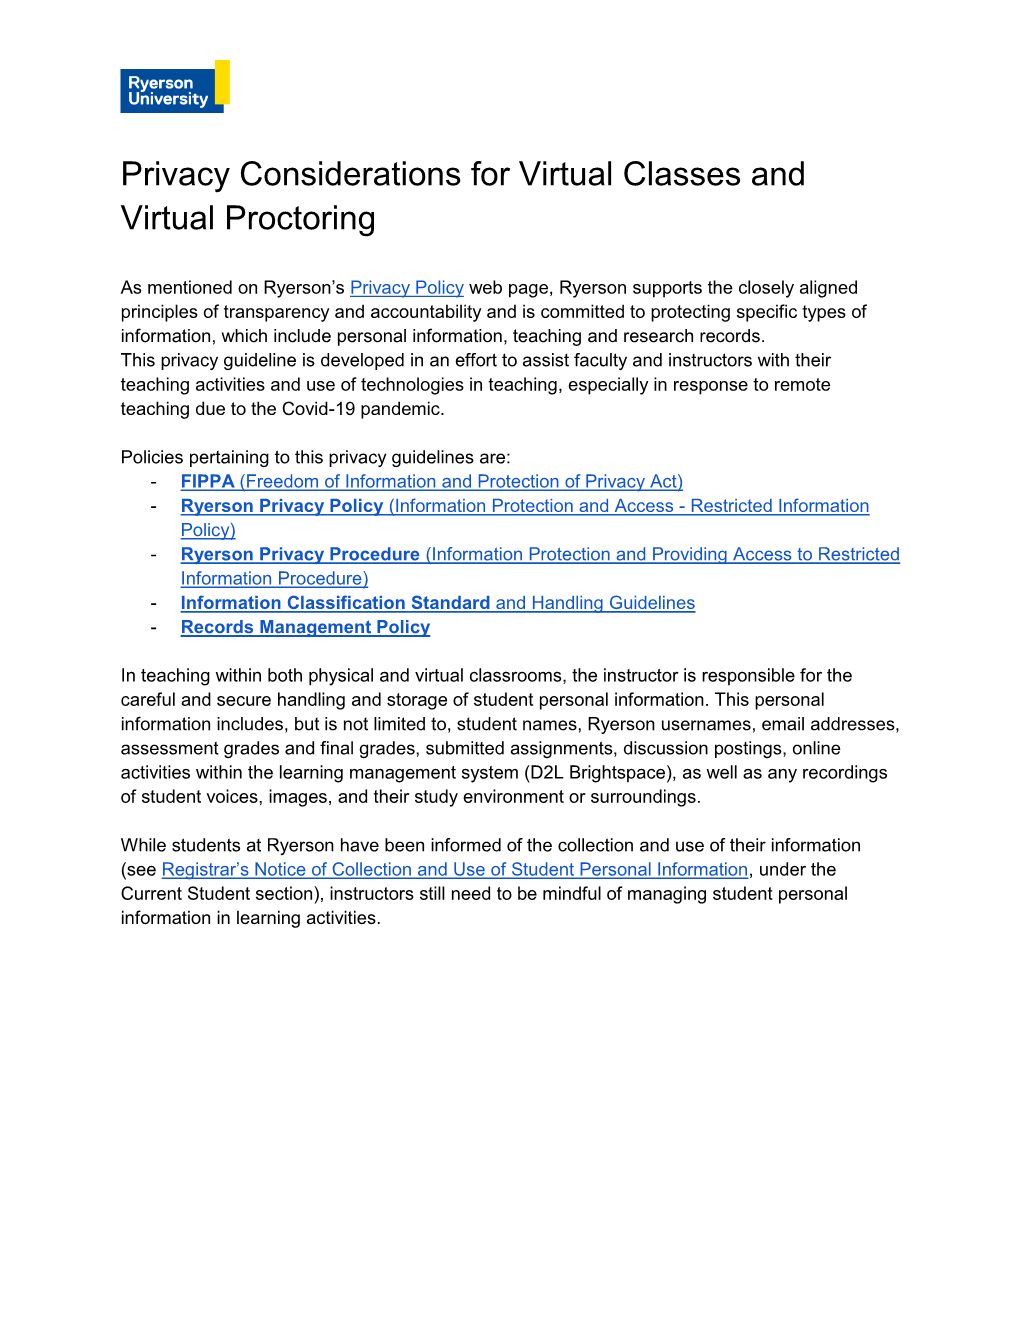 Privacy Considerations for Virtual Classes and Virtual Proctoring